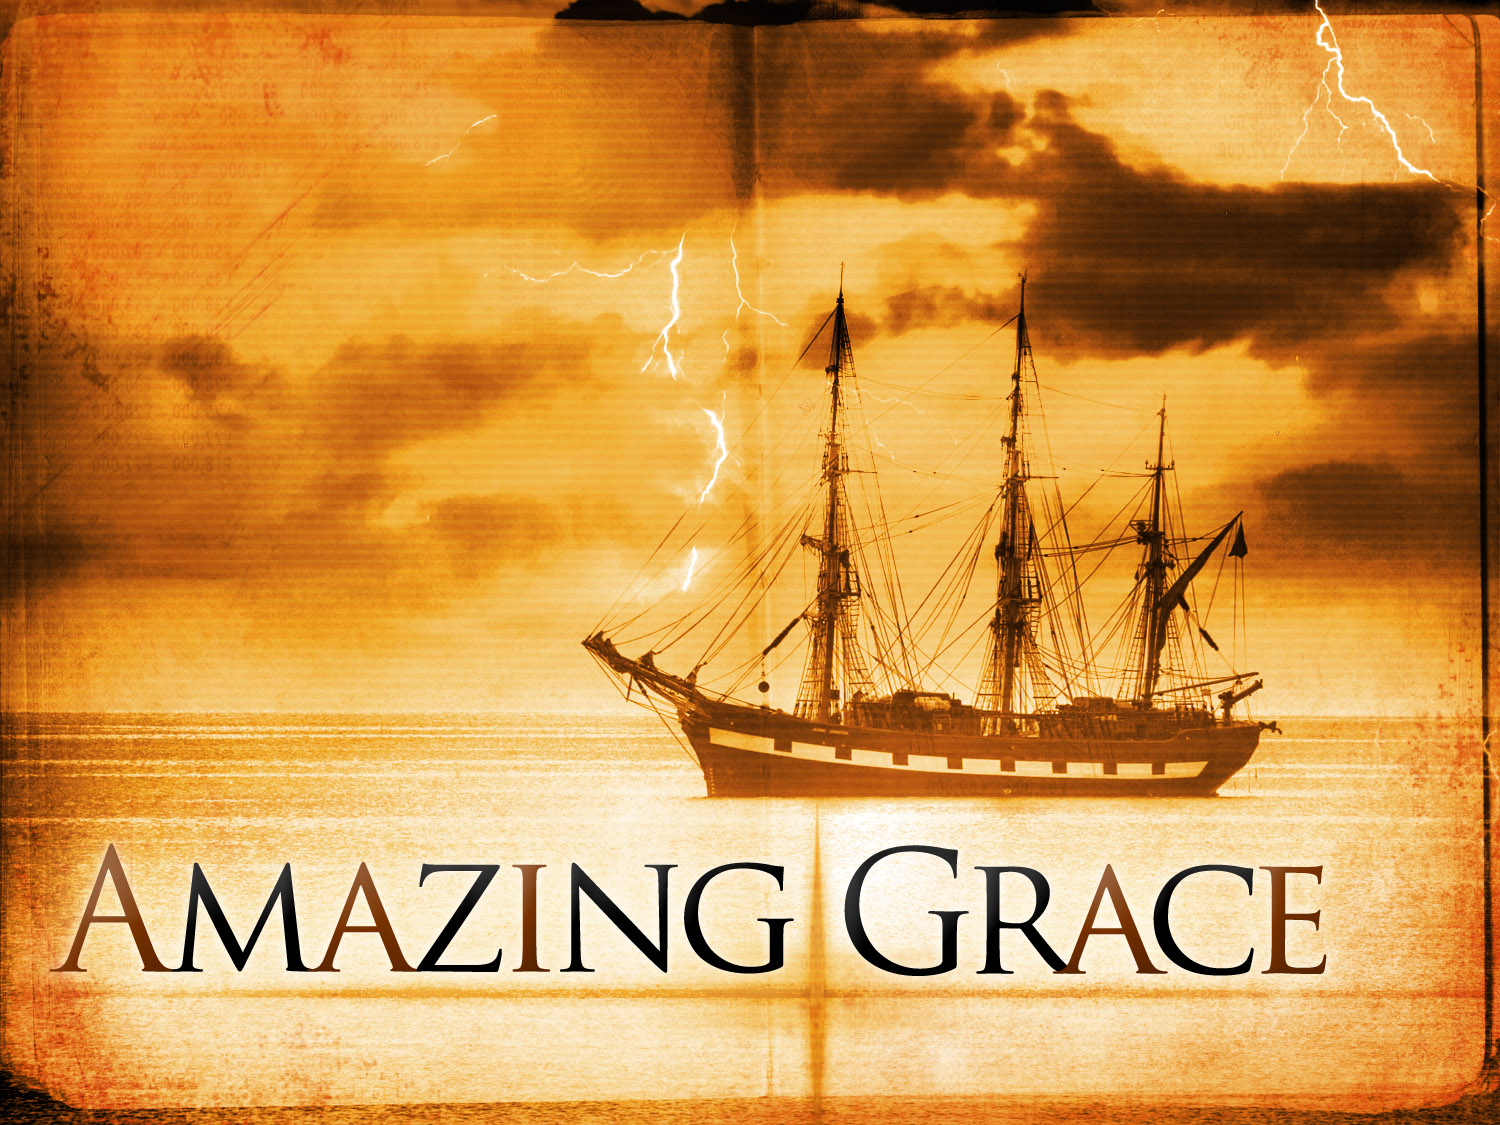 Sister Missionaries of the Salt Lake City Temple Square Mission Perform “Amazing Grace” (My Chains Are Gone)